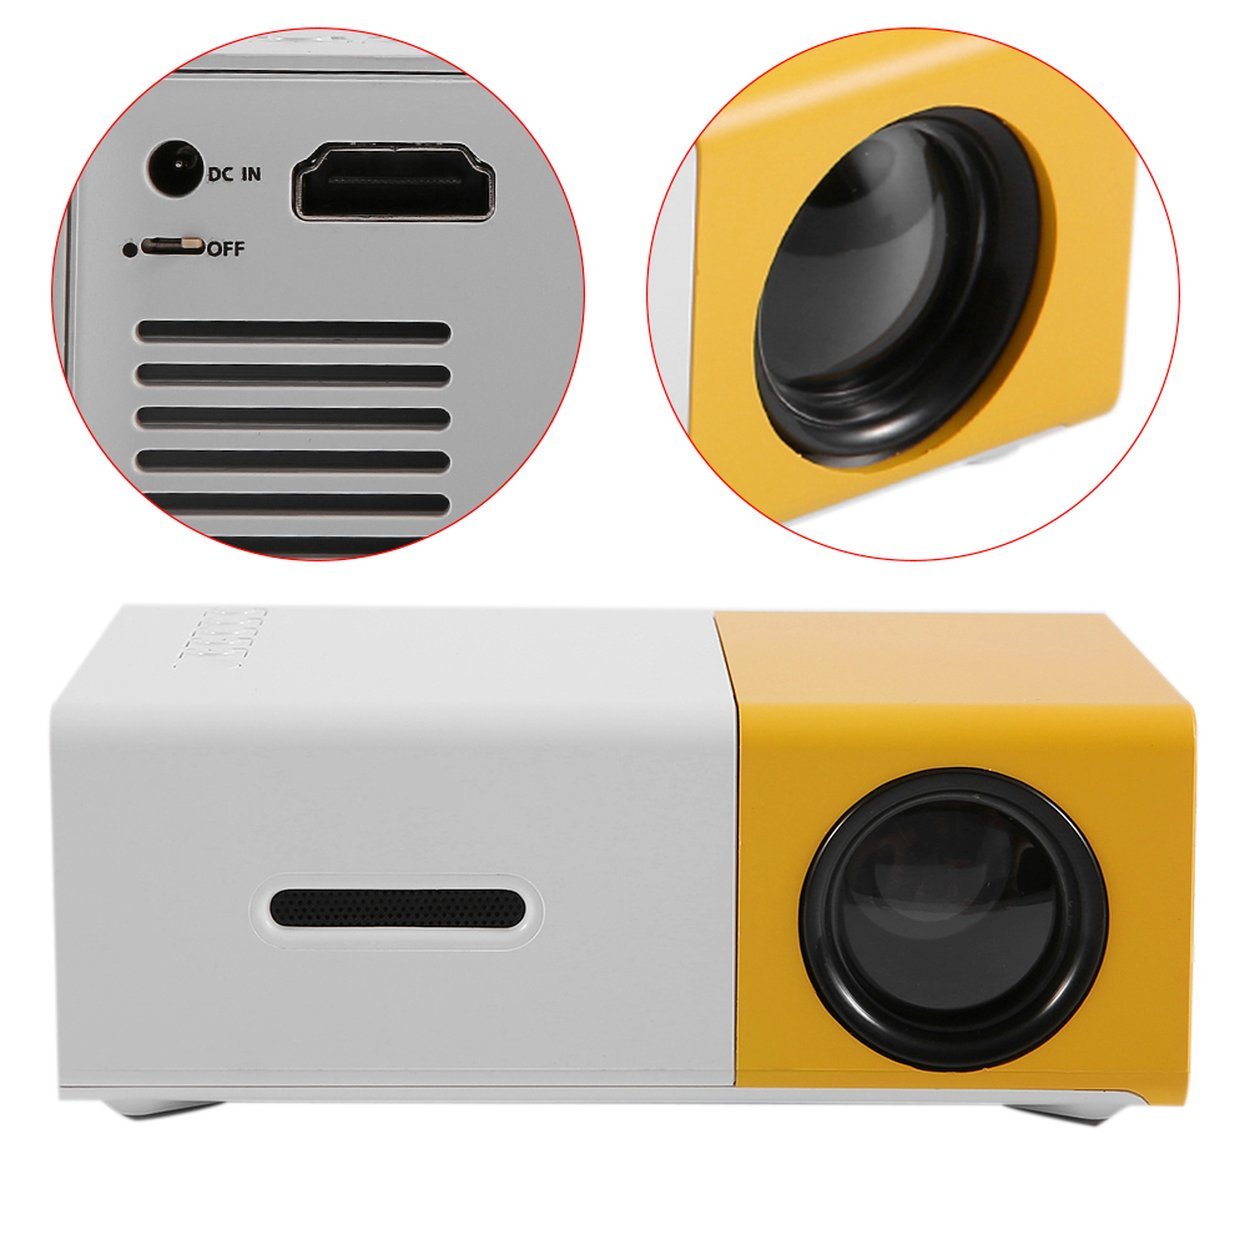 YG300 Professional Mini Projector Full HD1080P Home Theater LED Projector LCD Video Media Player Projector Yellow & White